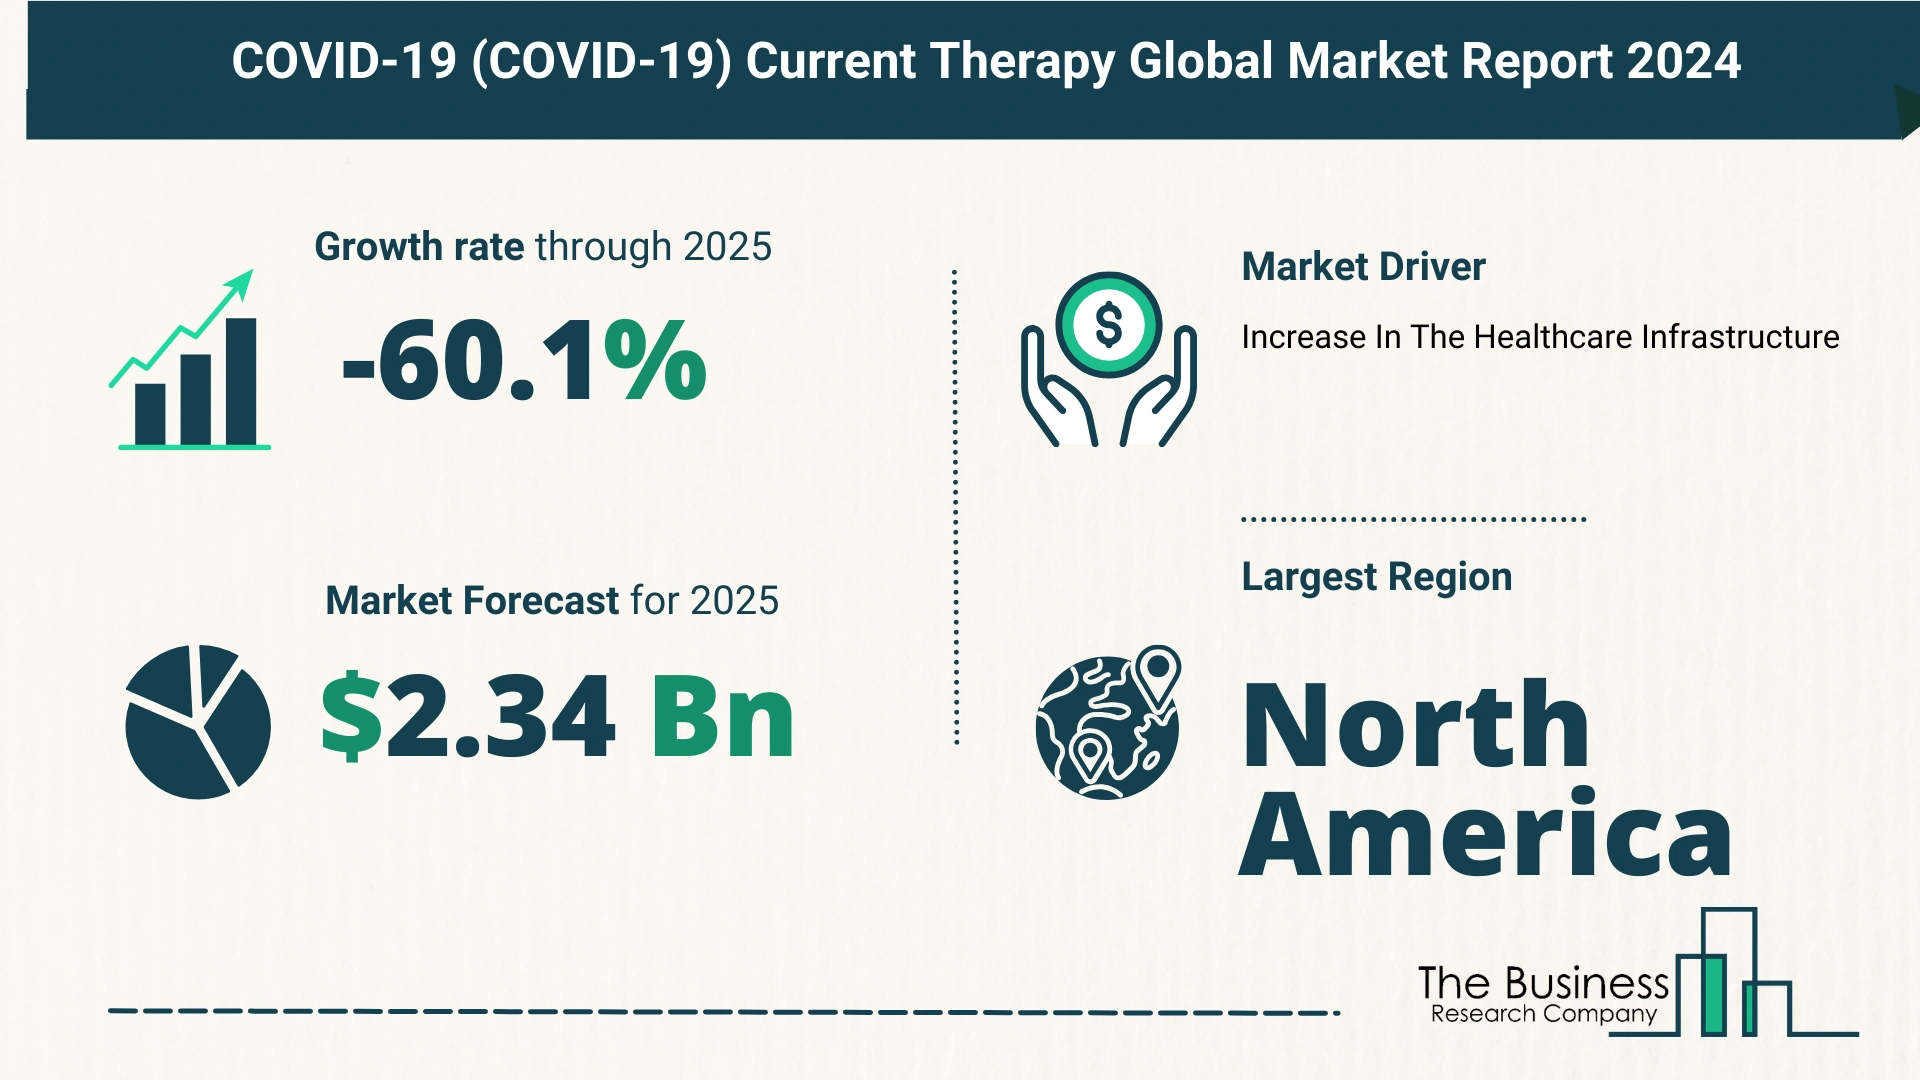 Global COVID-19 (COVID-19) Current Therapy Market Size